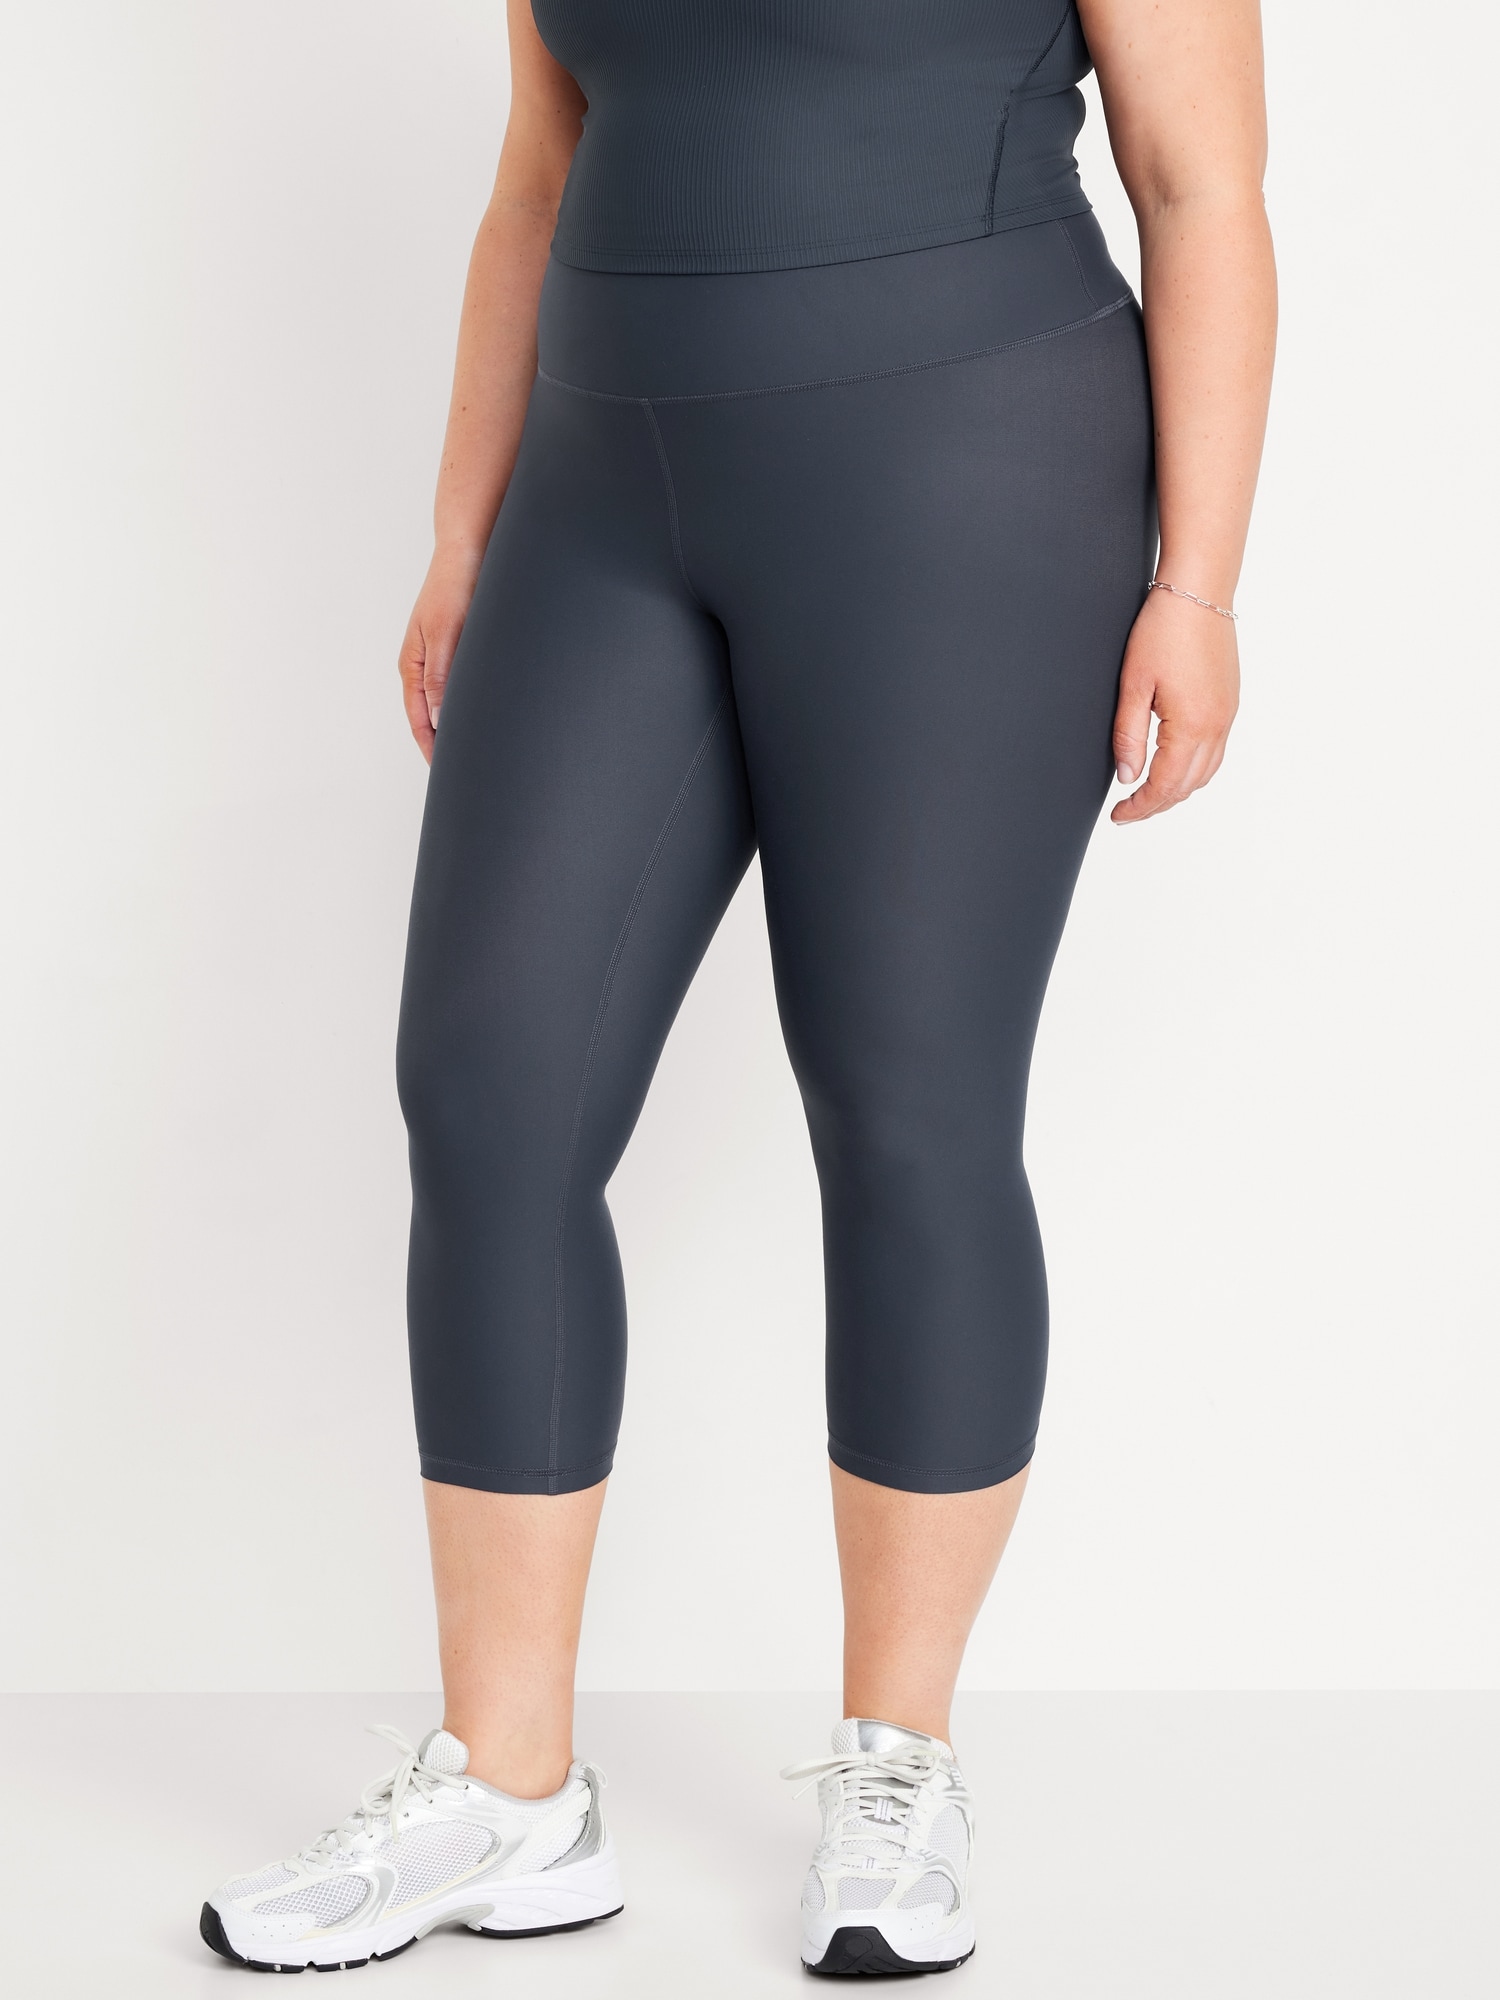 Old Navy High-Waisted PowerSoft Run Crop Leggings Review